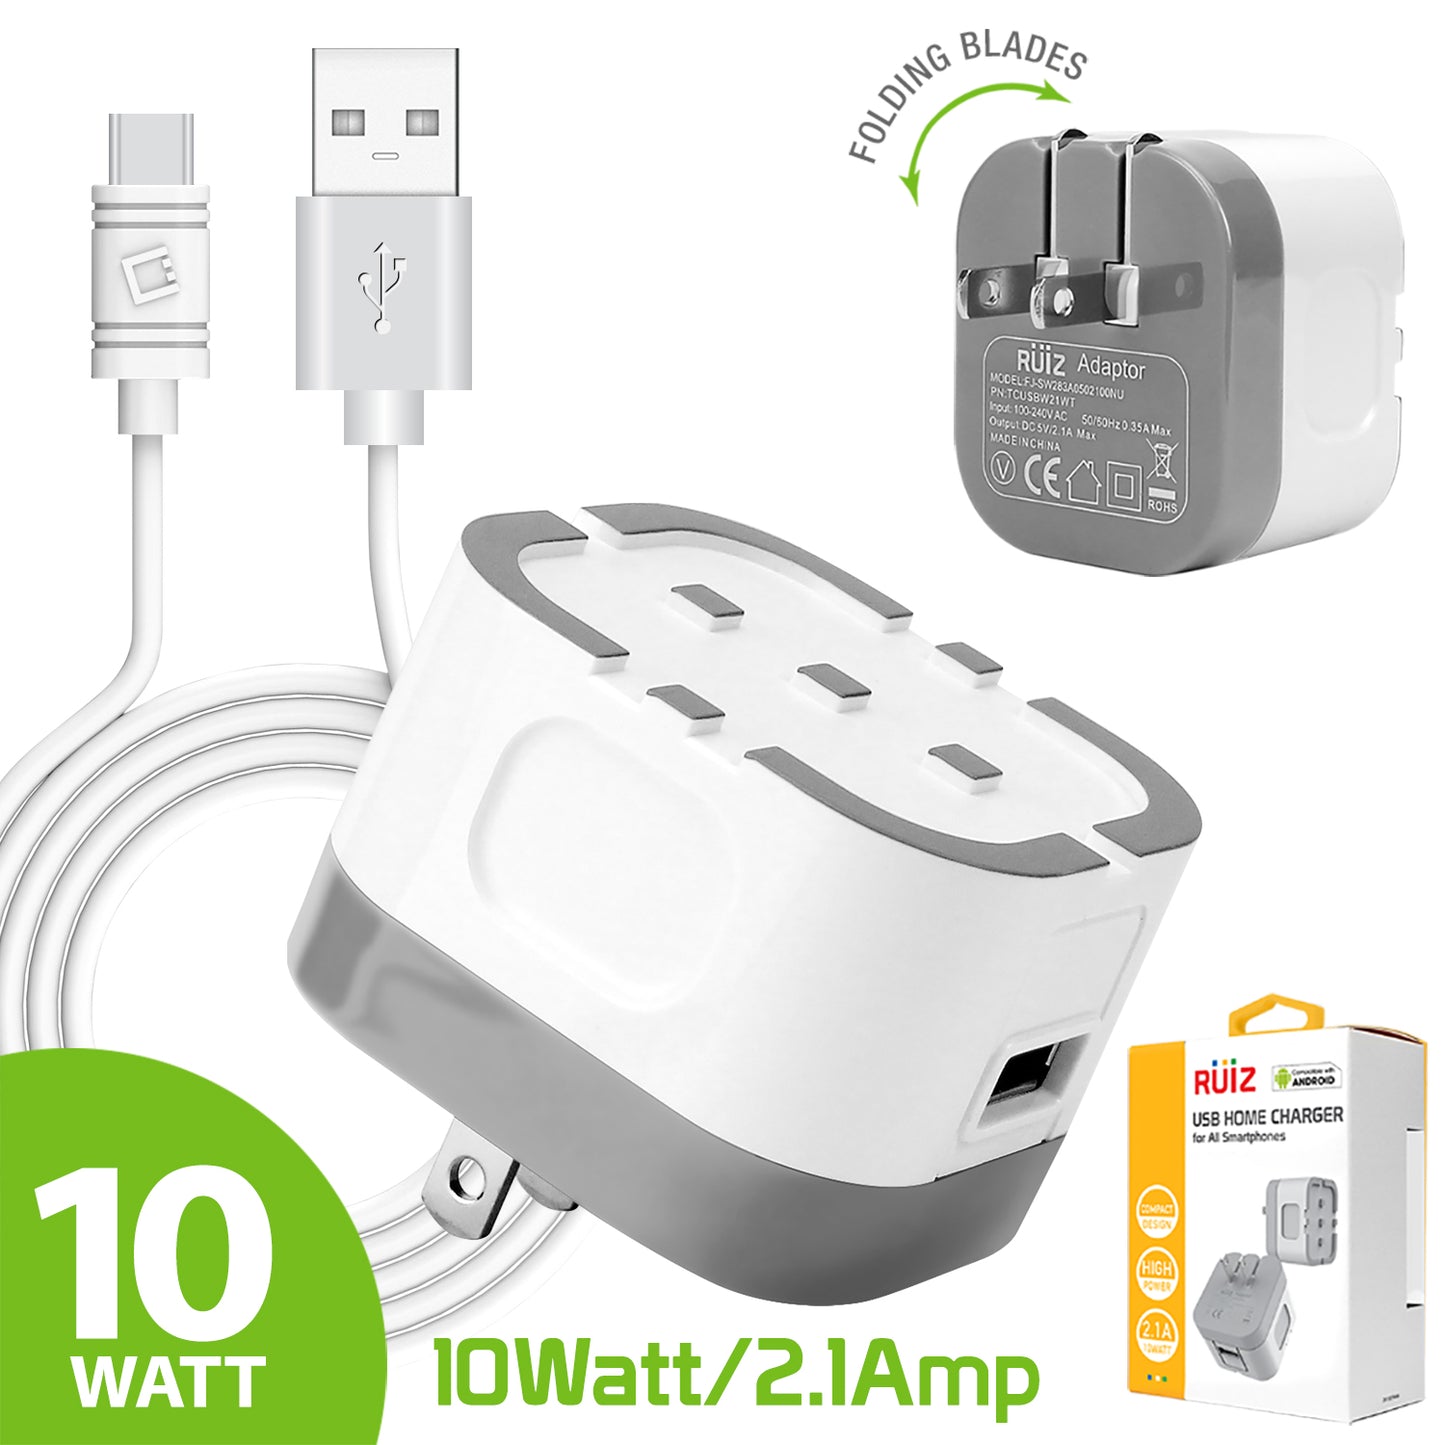 RUIZ by Cellet High Powered 2.1A (10W) USB Home Wall Charger (TYPE-C Cable Included) - White